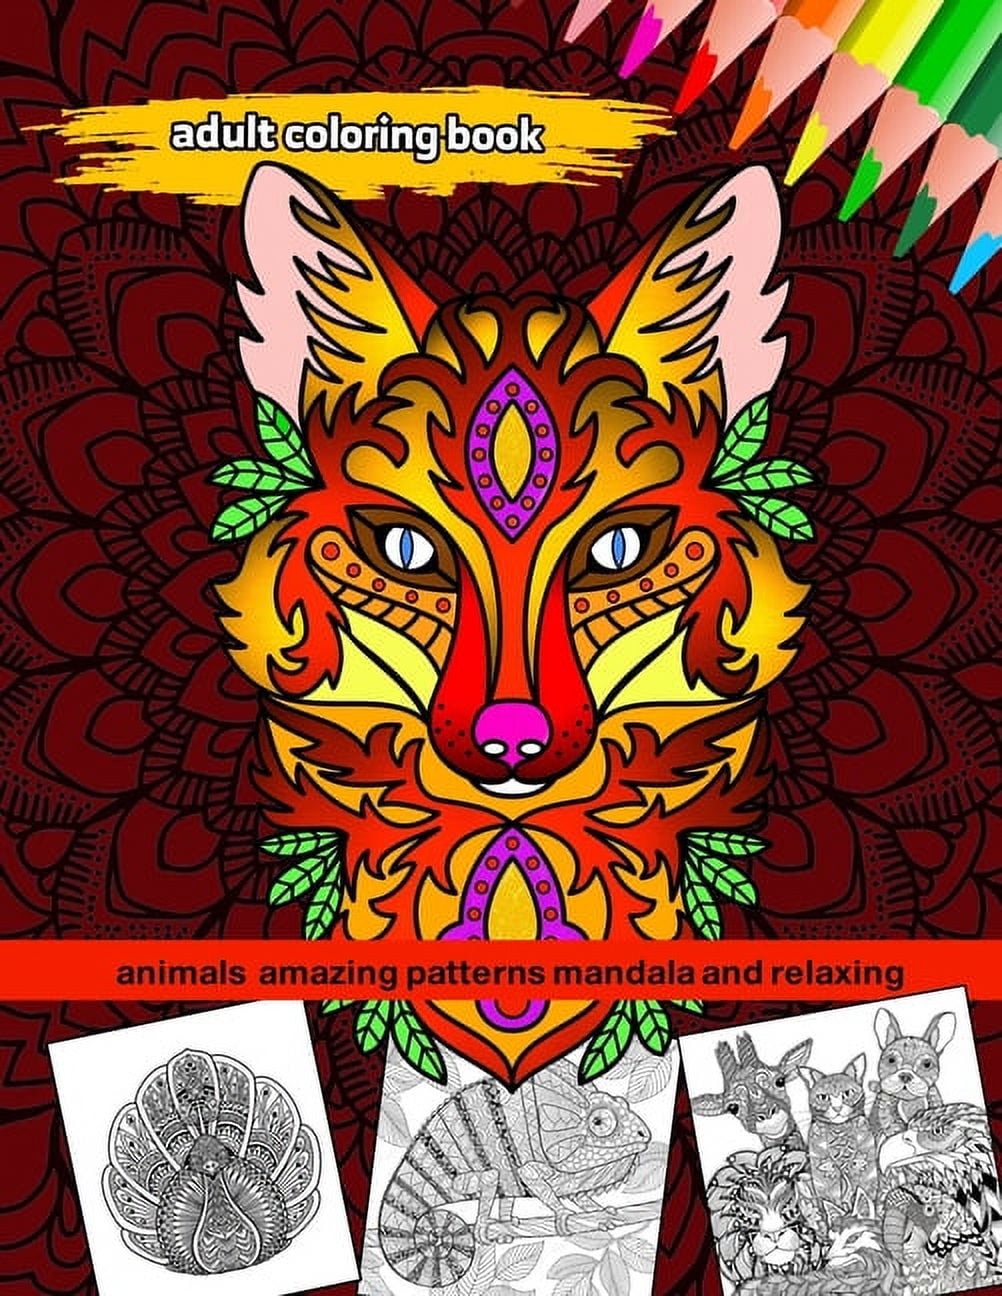 adult coloring book: Animals amazing patterns mandala and relaxing